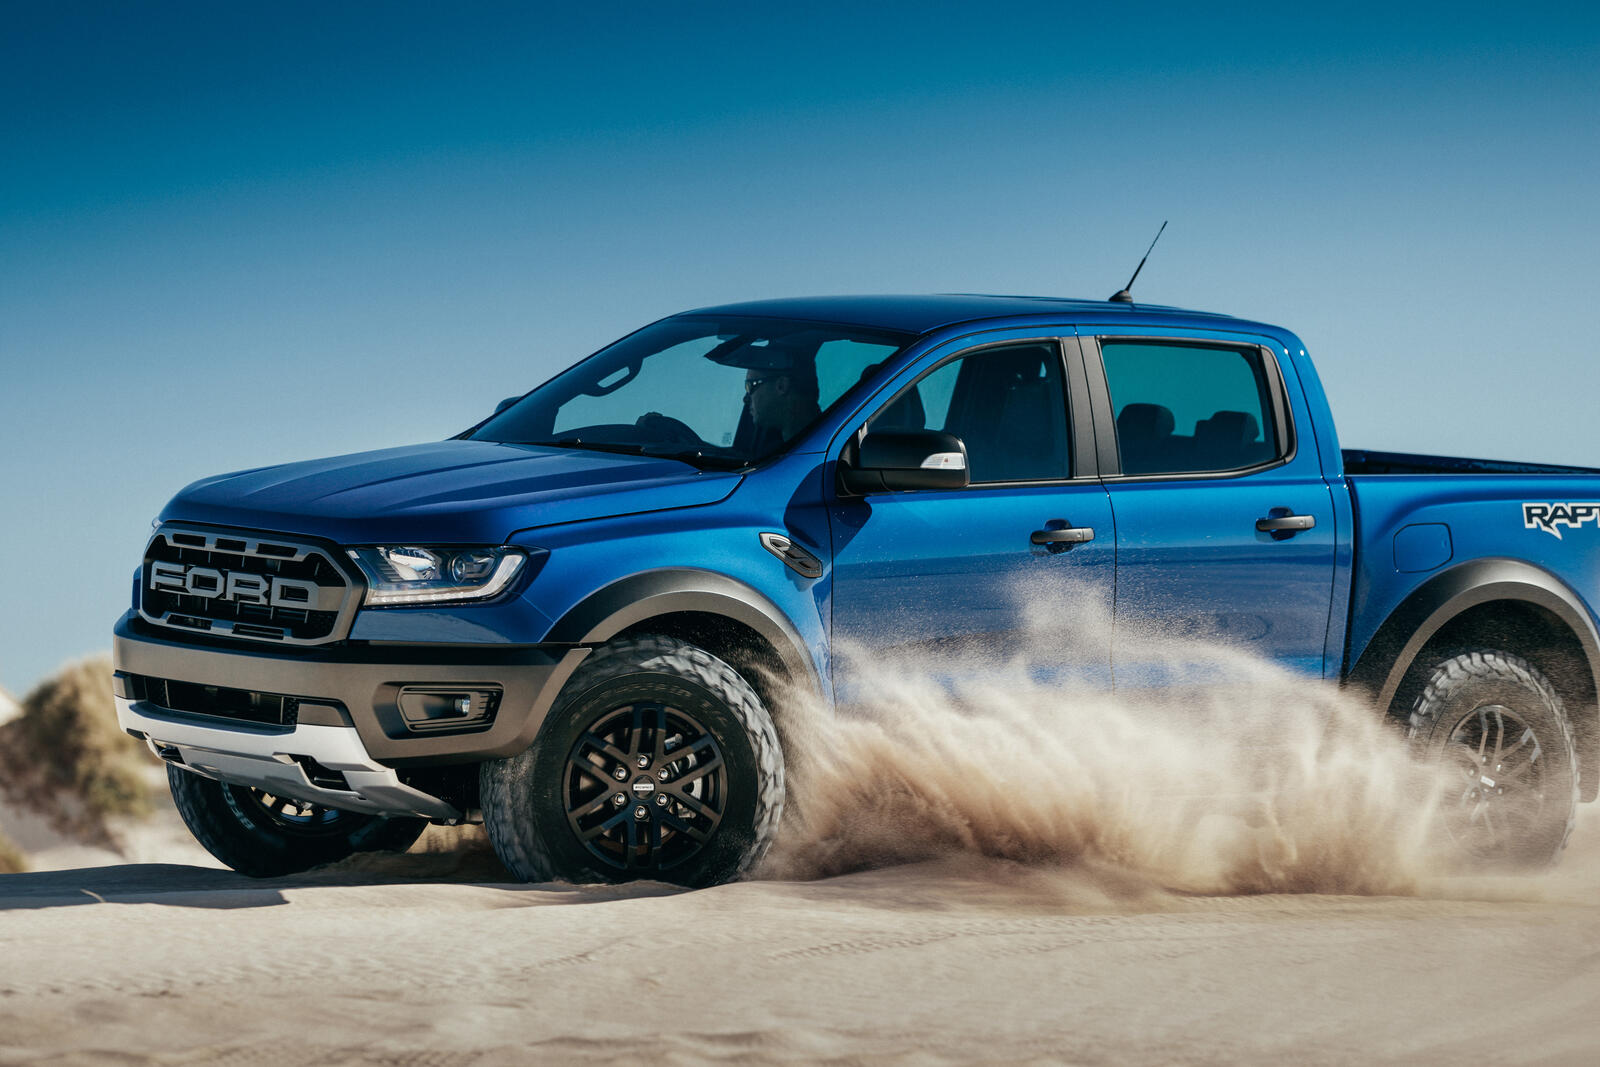 Wallpapers Ford Raptor Ford cars on the desktop